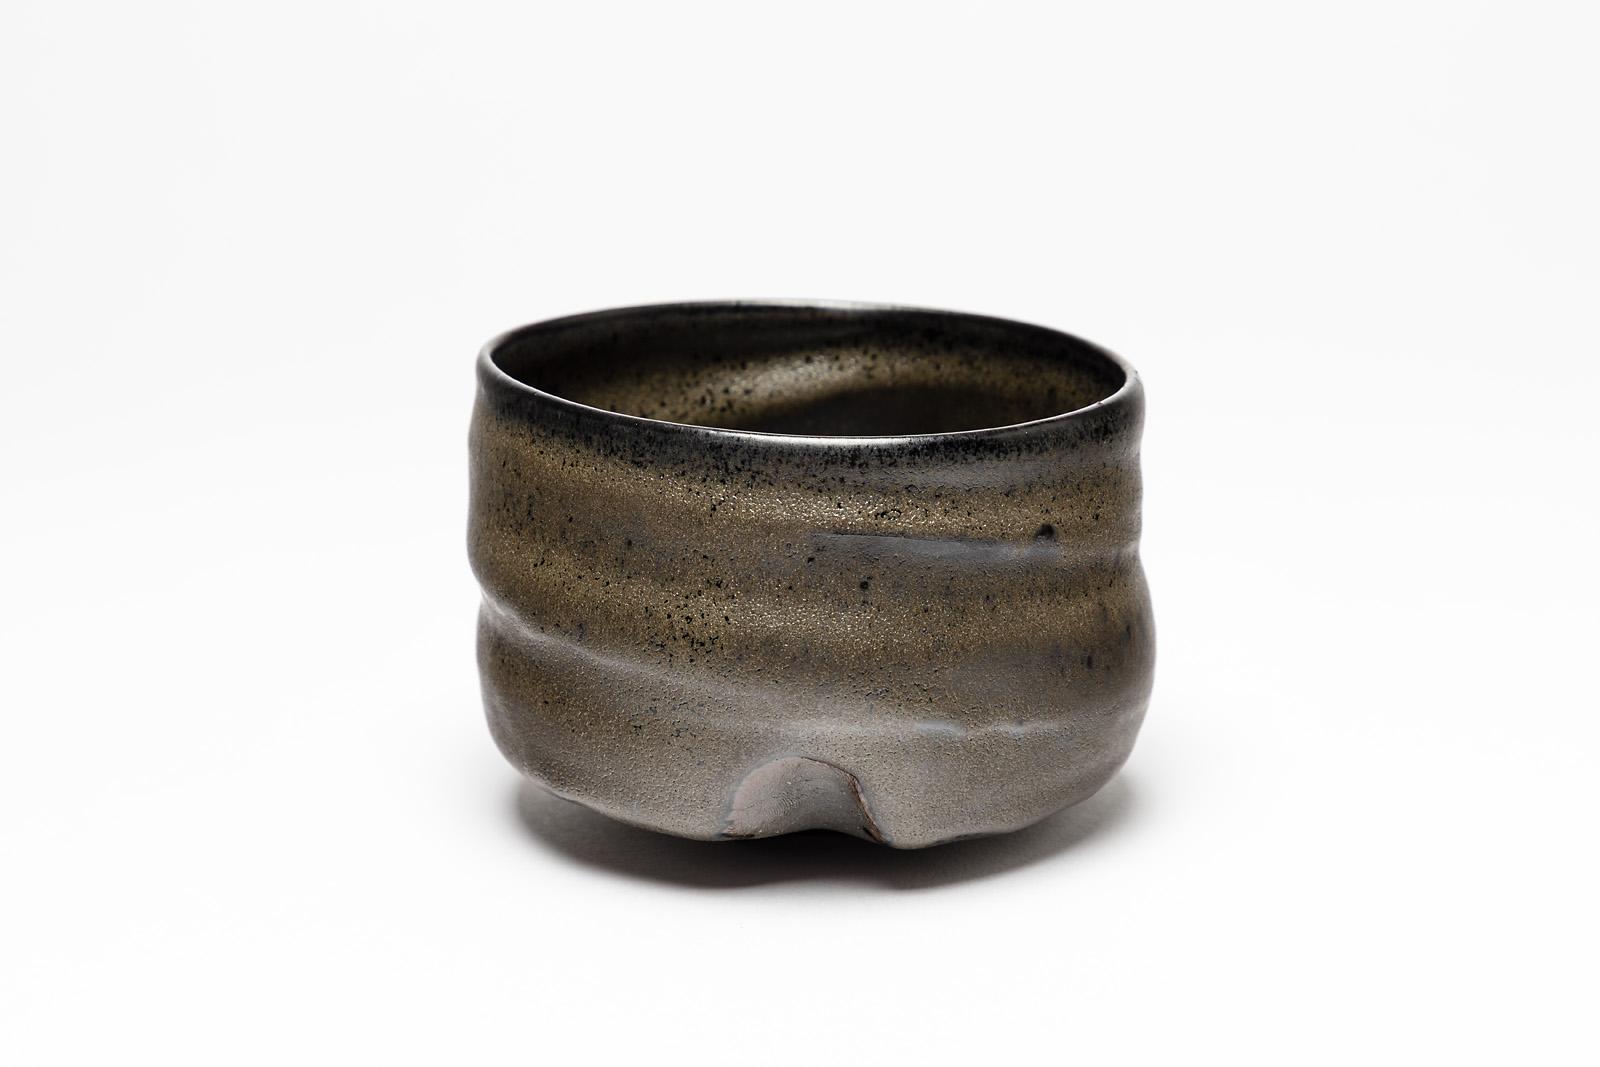 Lukas Richarz

Contemporary handmade ceramic bowl by the French artist.

Elegant black stoneware ceramic glaze color.

Original perfect condition

Realized in France, circa 2019

Signed under the base

Measures: Height 8cm, large 11cm.